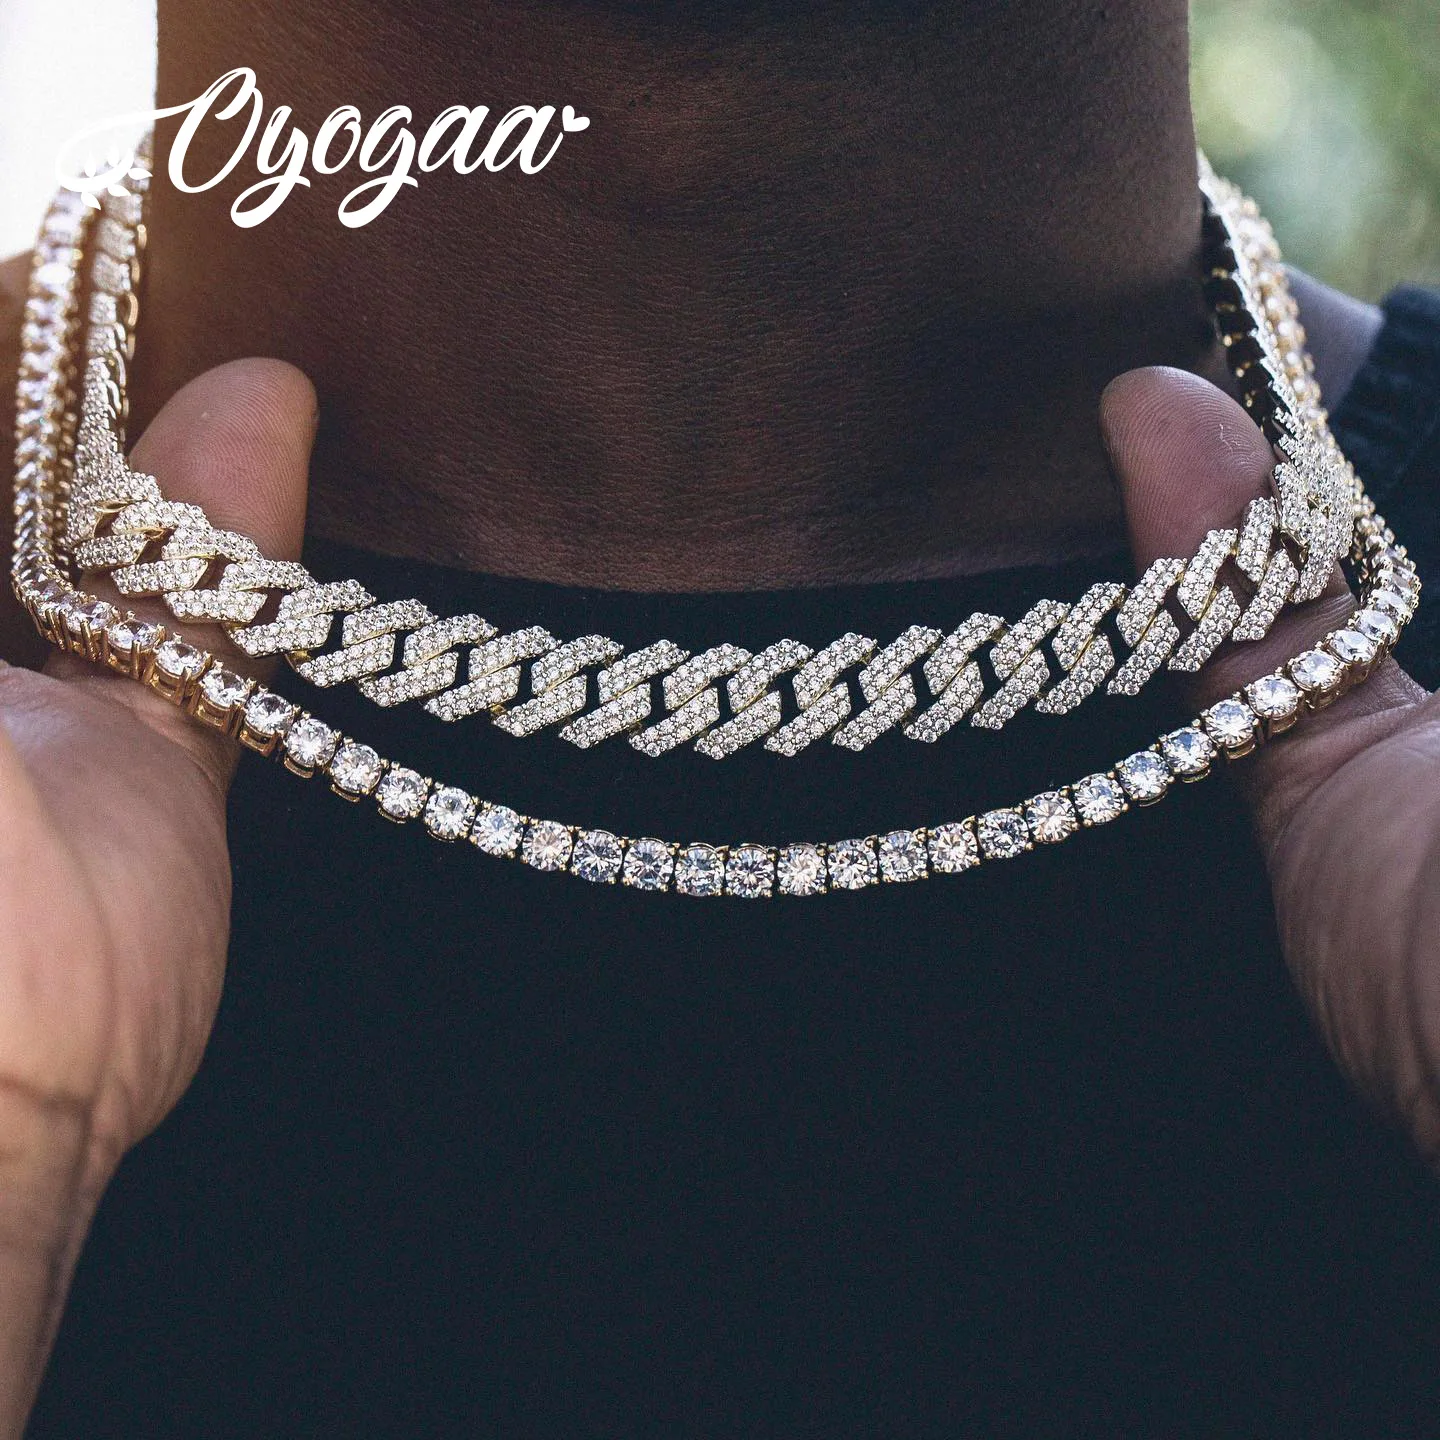 

OYOGAA 14mm Iced Micro Pave Cubic Zirconia Cuban Chain Necklace With Box/Spring Clasp Hip Hop Fashion Jewelry Gift Men Women